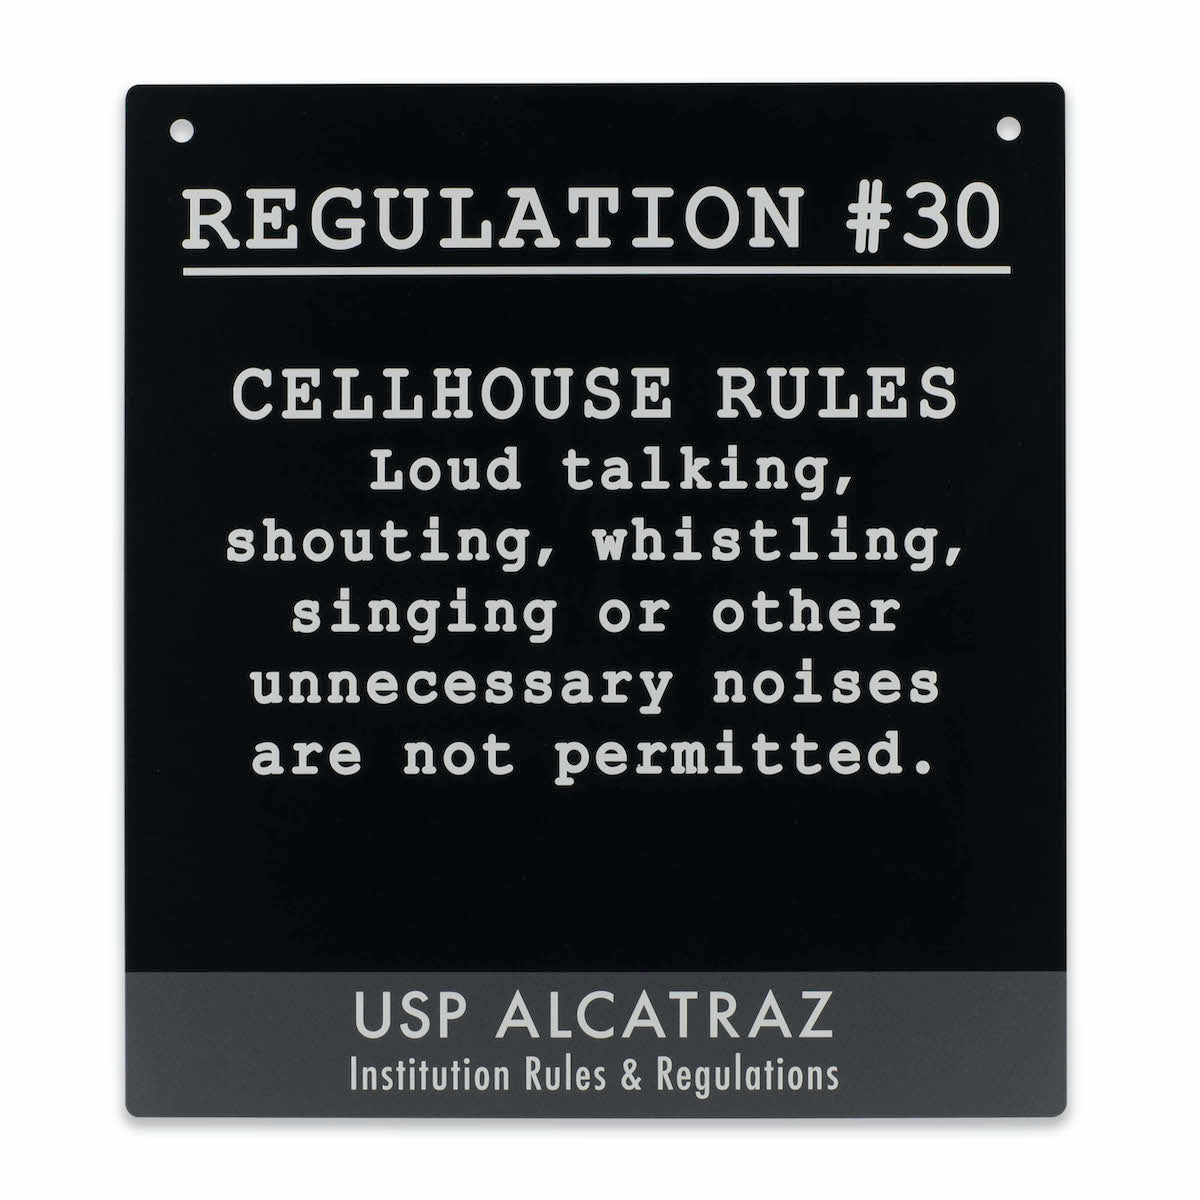 Decorative metal sign with Alcatraz Regulation #30 text: "Cellhouse Rules. Loud talking, shouting, whistling, singing or other unnecessary noises are not permitted." Black sign with white text and grey accent.